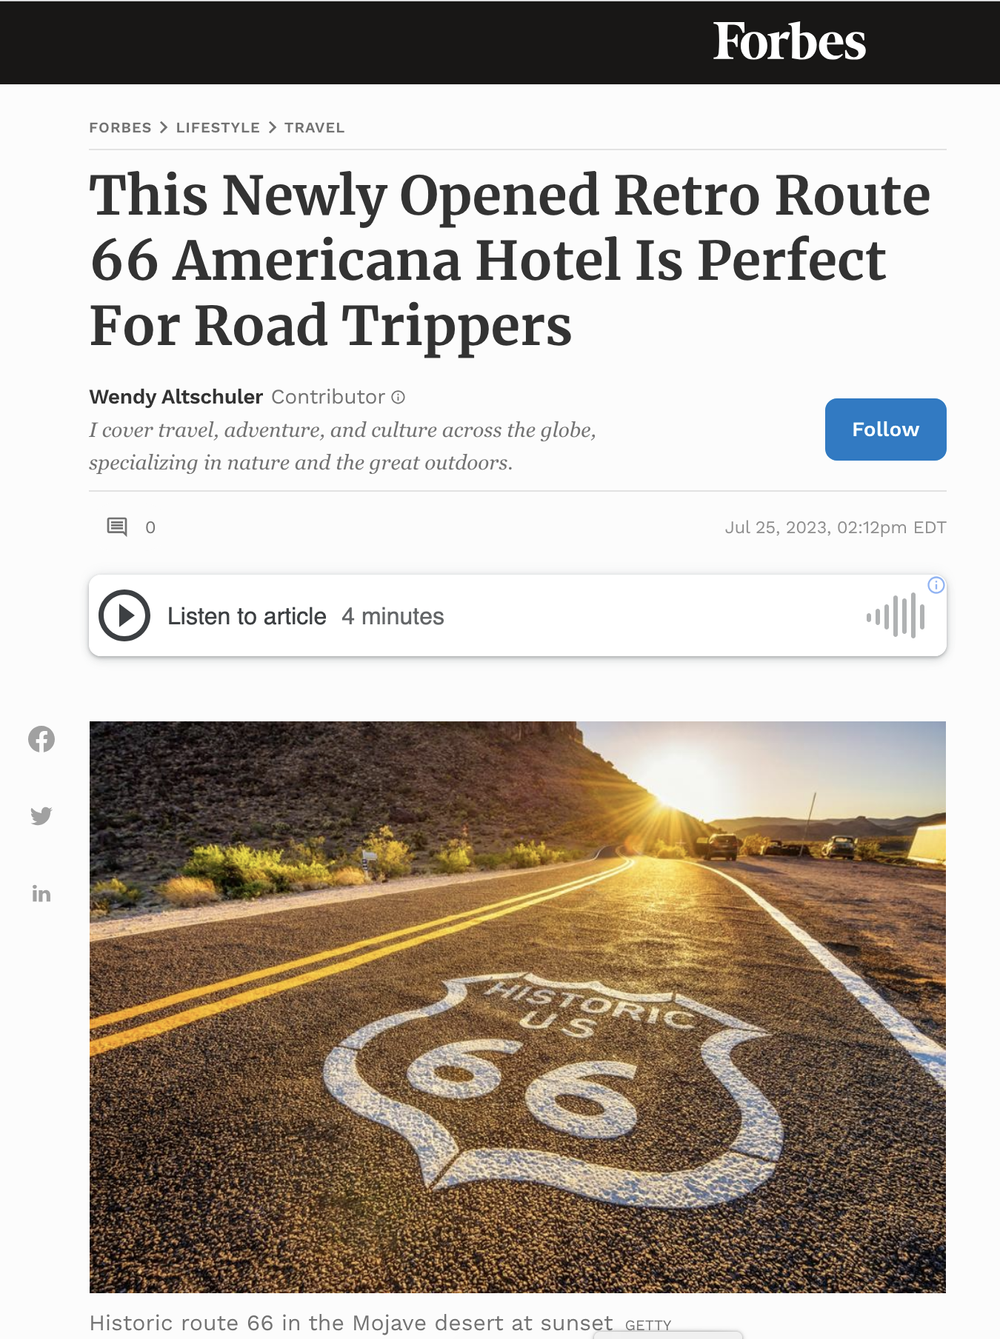 This Newly Opened Retro Route 66 Americana Hotel Is Perfect For Road Trippers